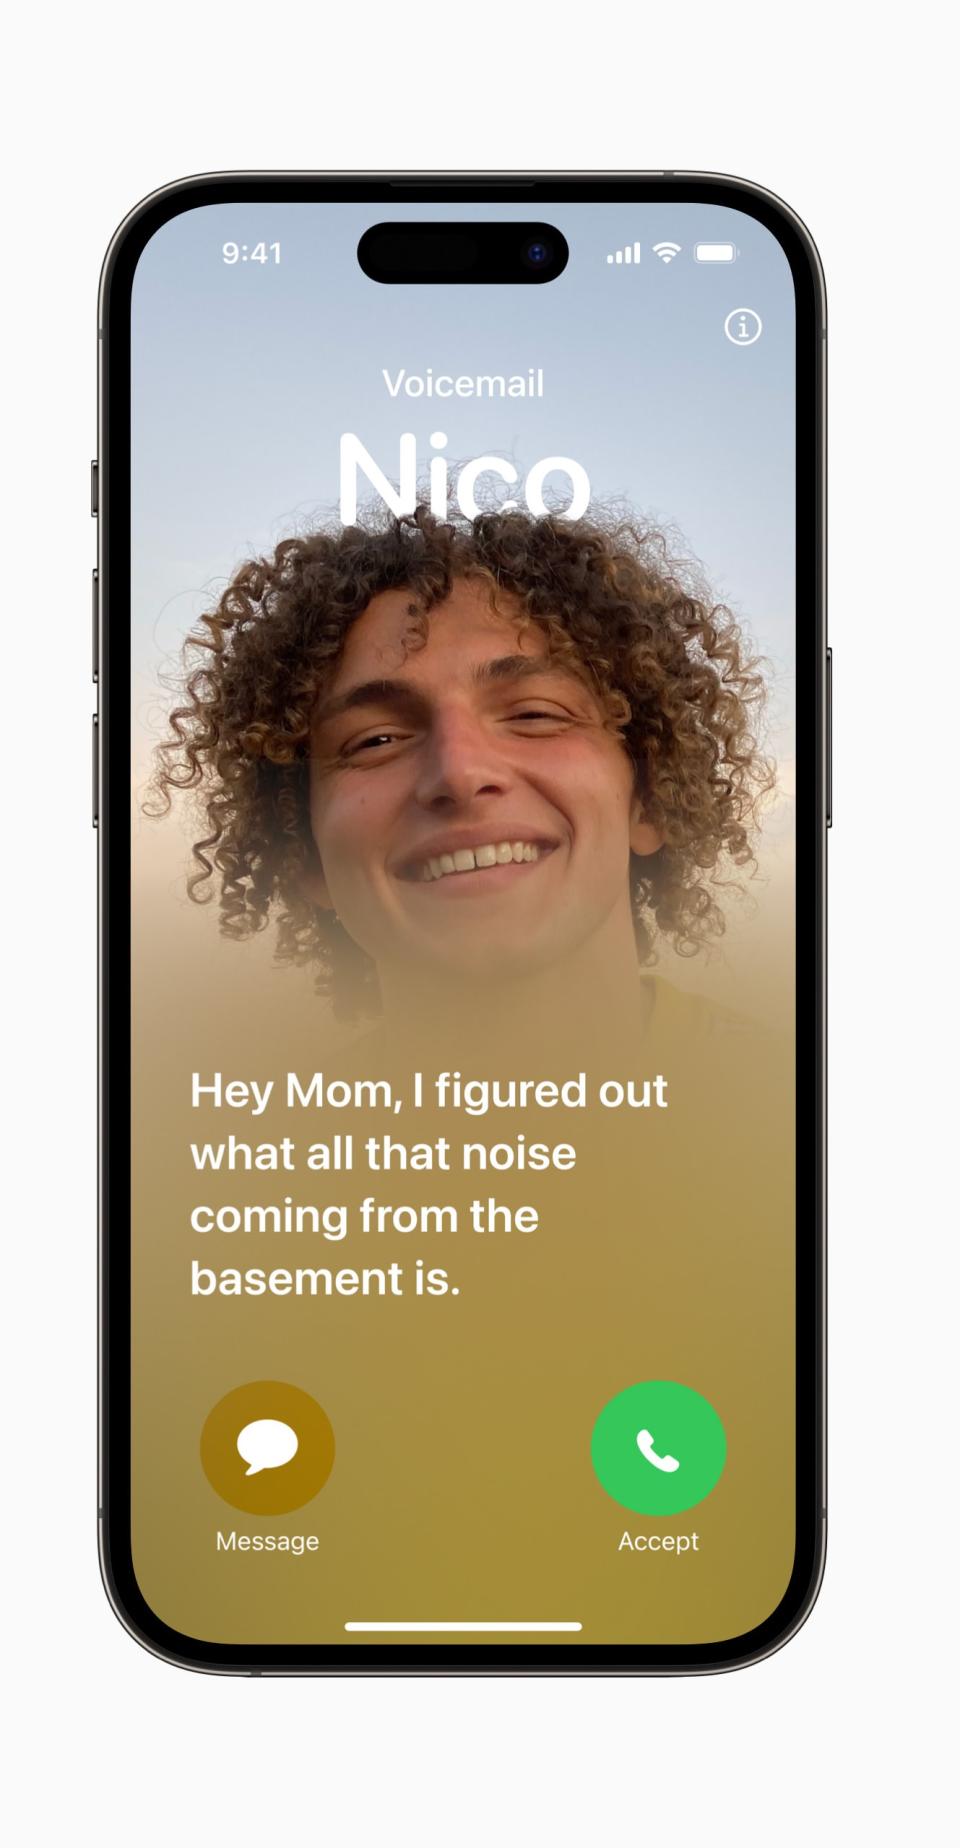 An iPhone screen displaying a Facetime call request with a note